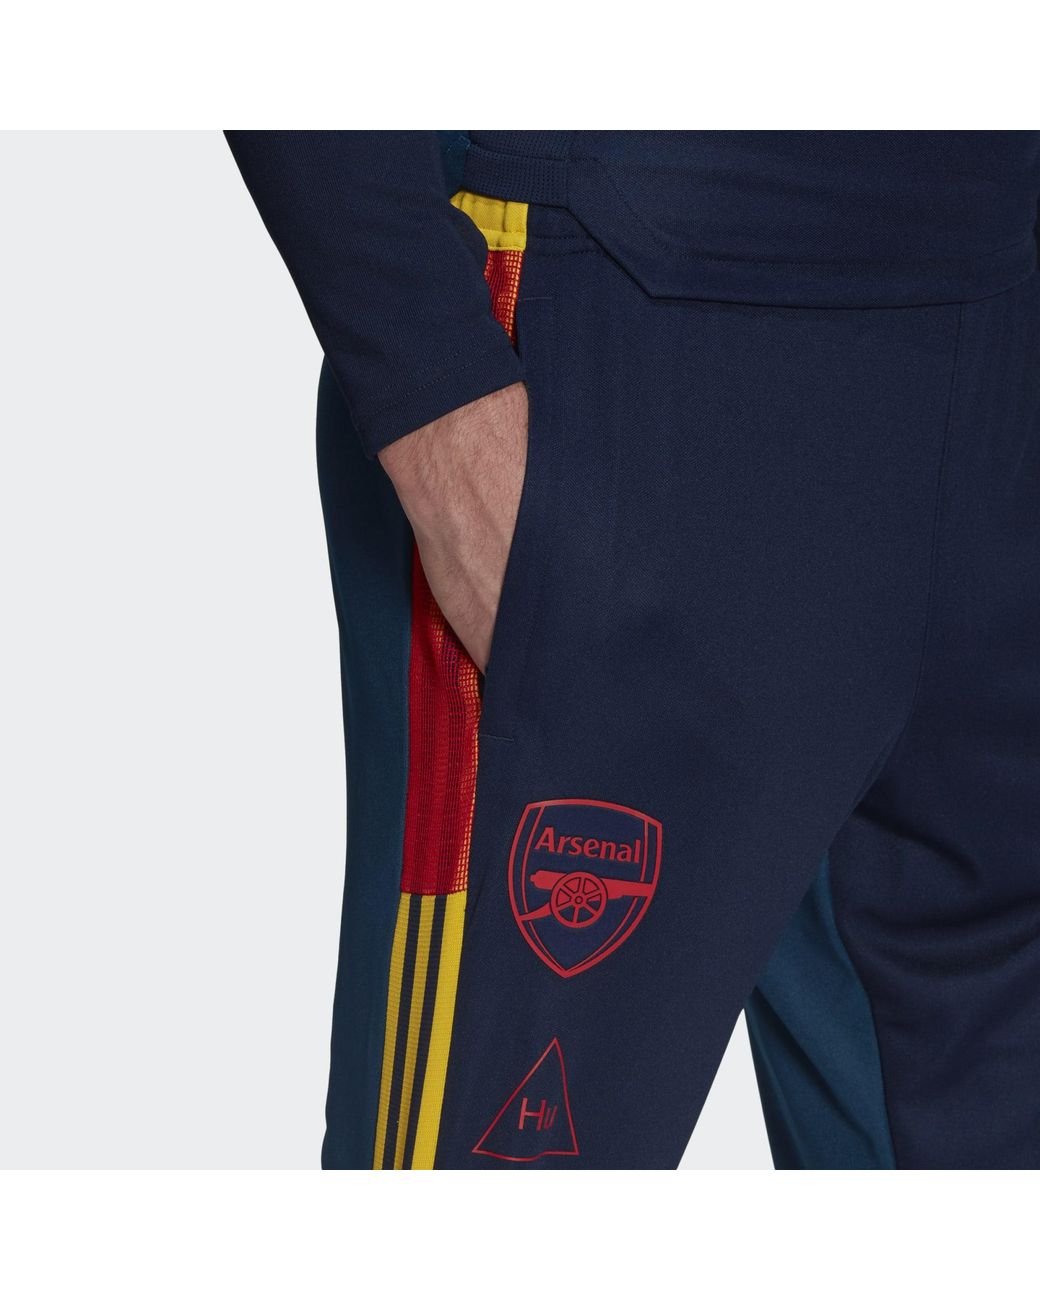 Arsenal FC X Adidas CleanCut 2324 third kit Where to buy price release  date and more details explored